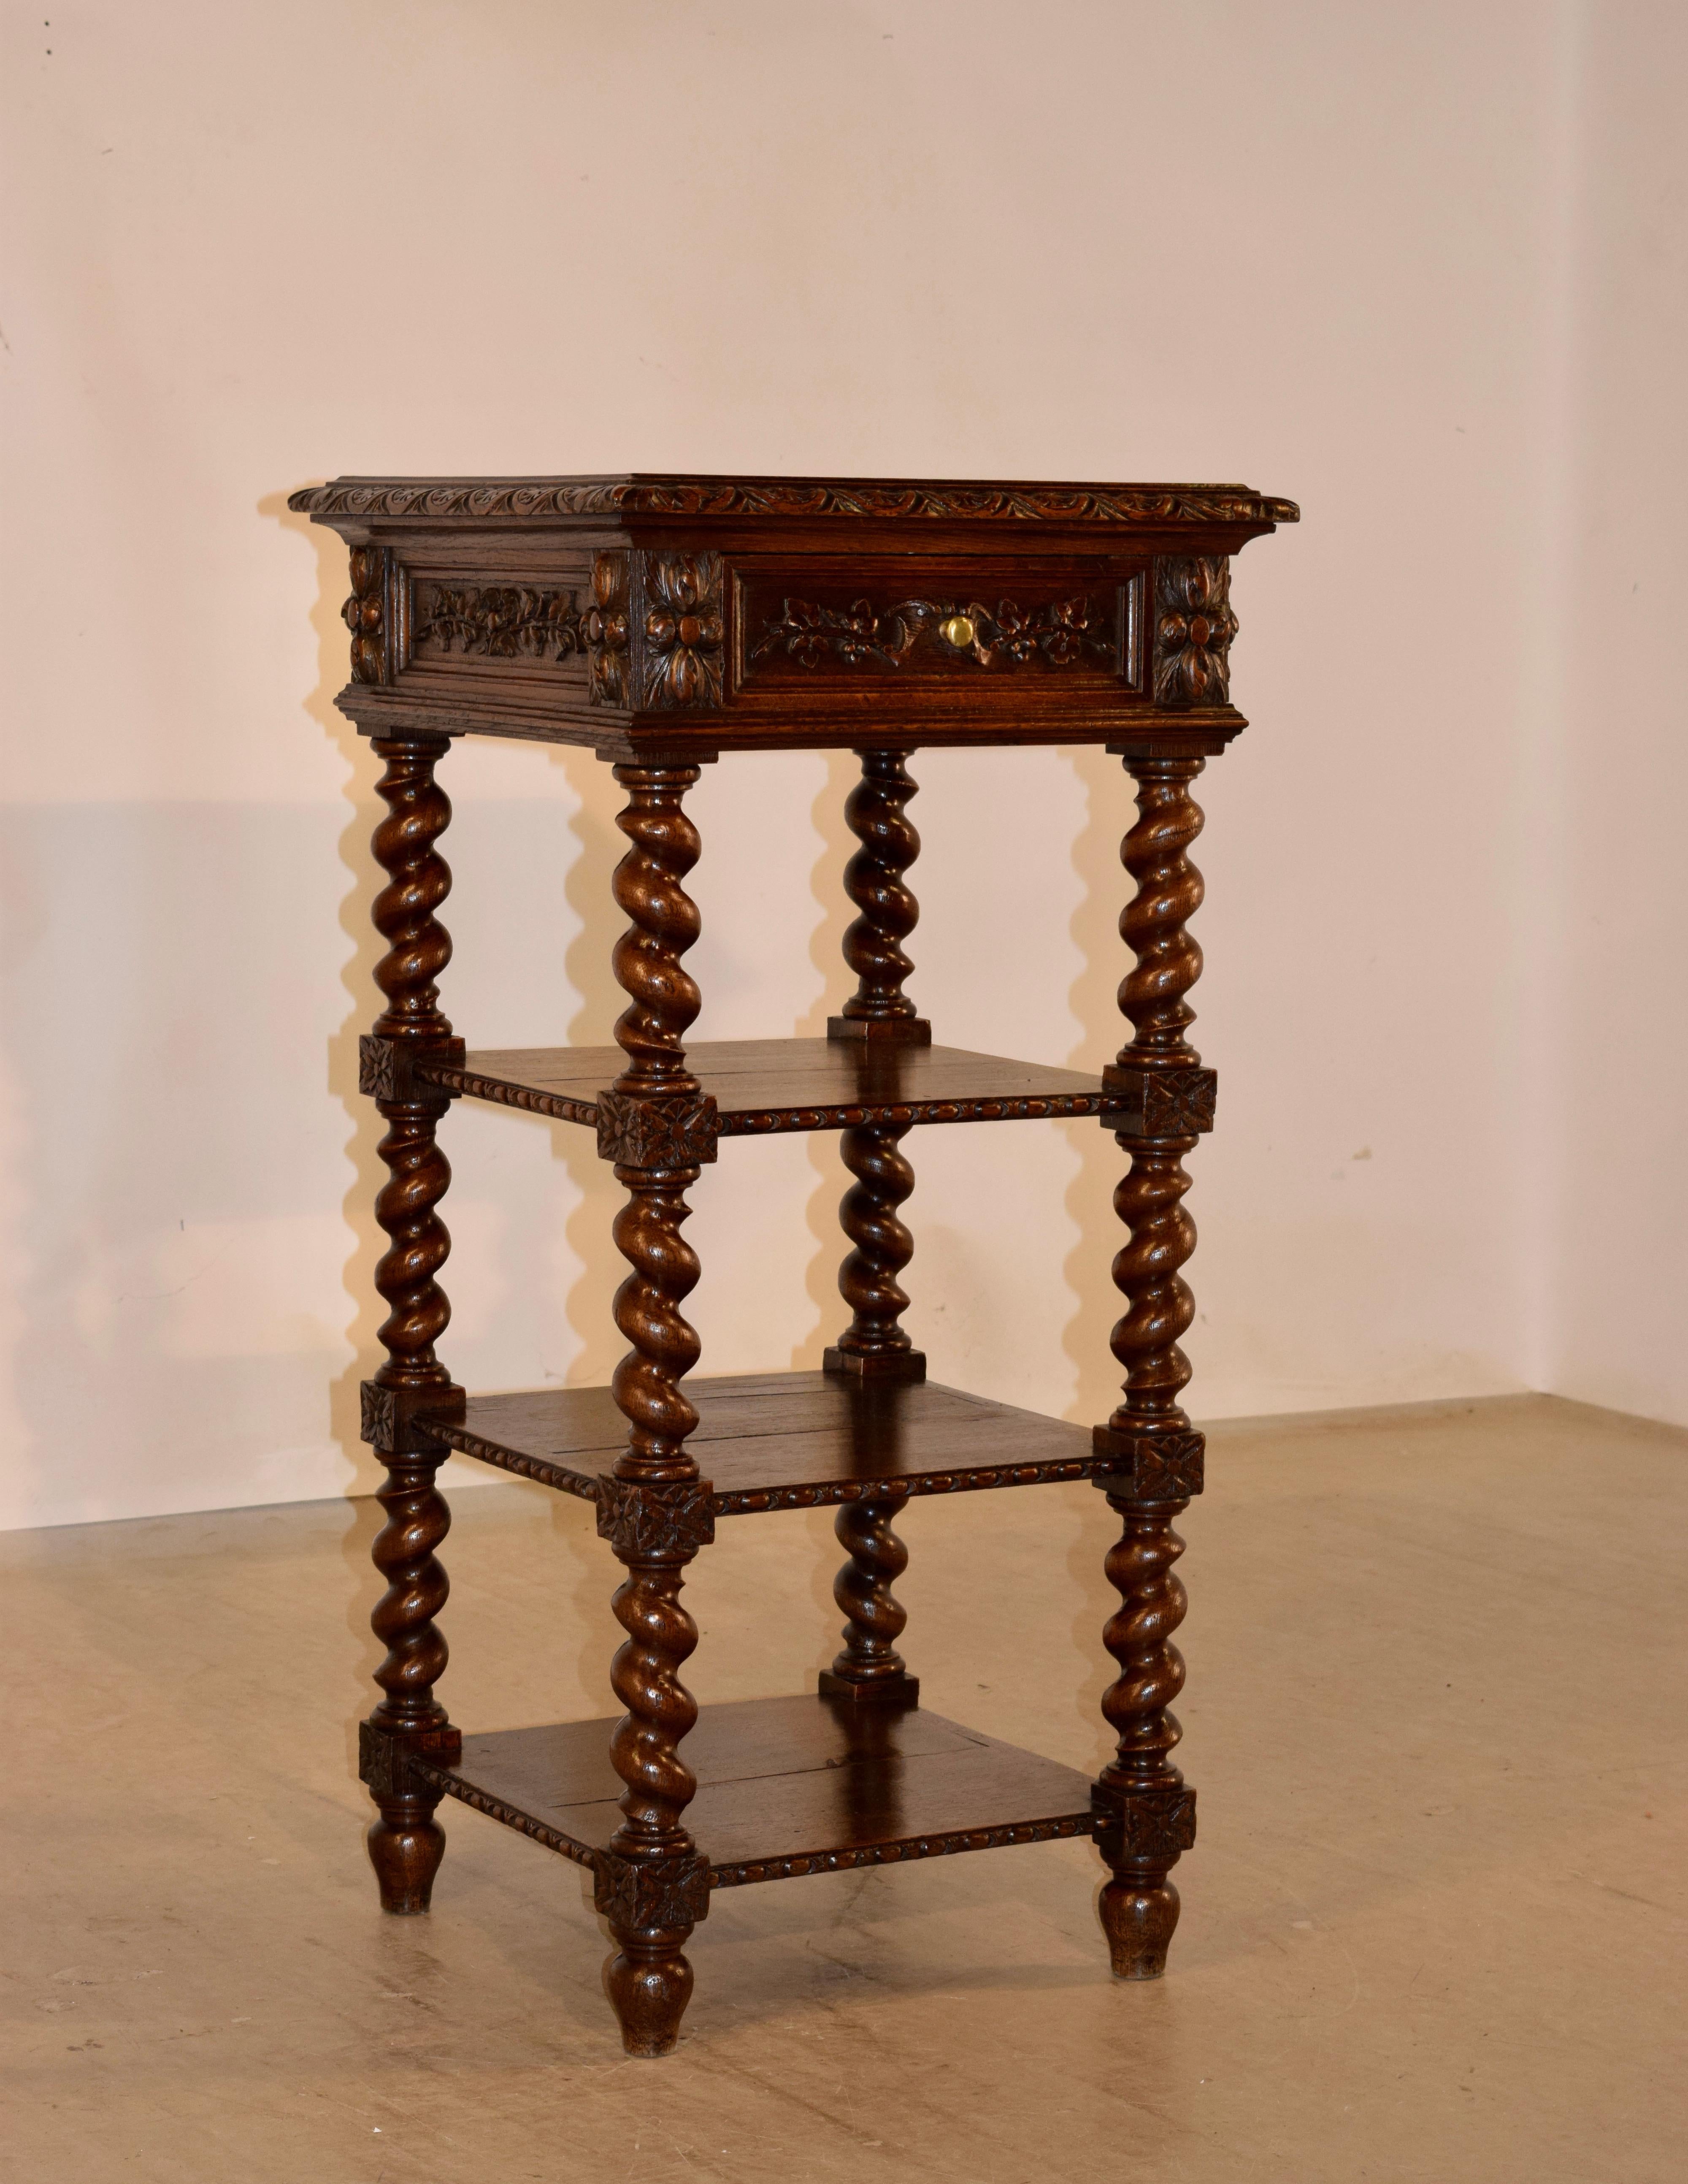 19th century oak shelf from France with a wonderfully beveled and carved decorated edge around the top, following down to paneled sides, which are adorned with hand carved decoration and molding. There is a single matching drawer in the front. The